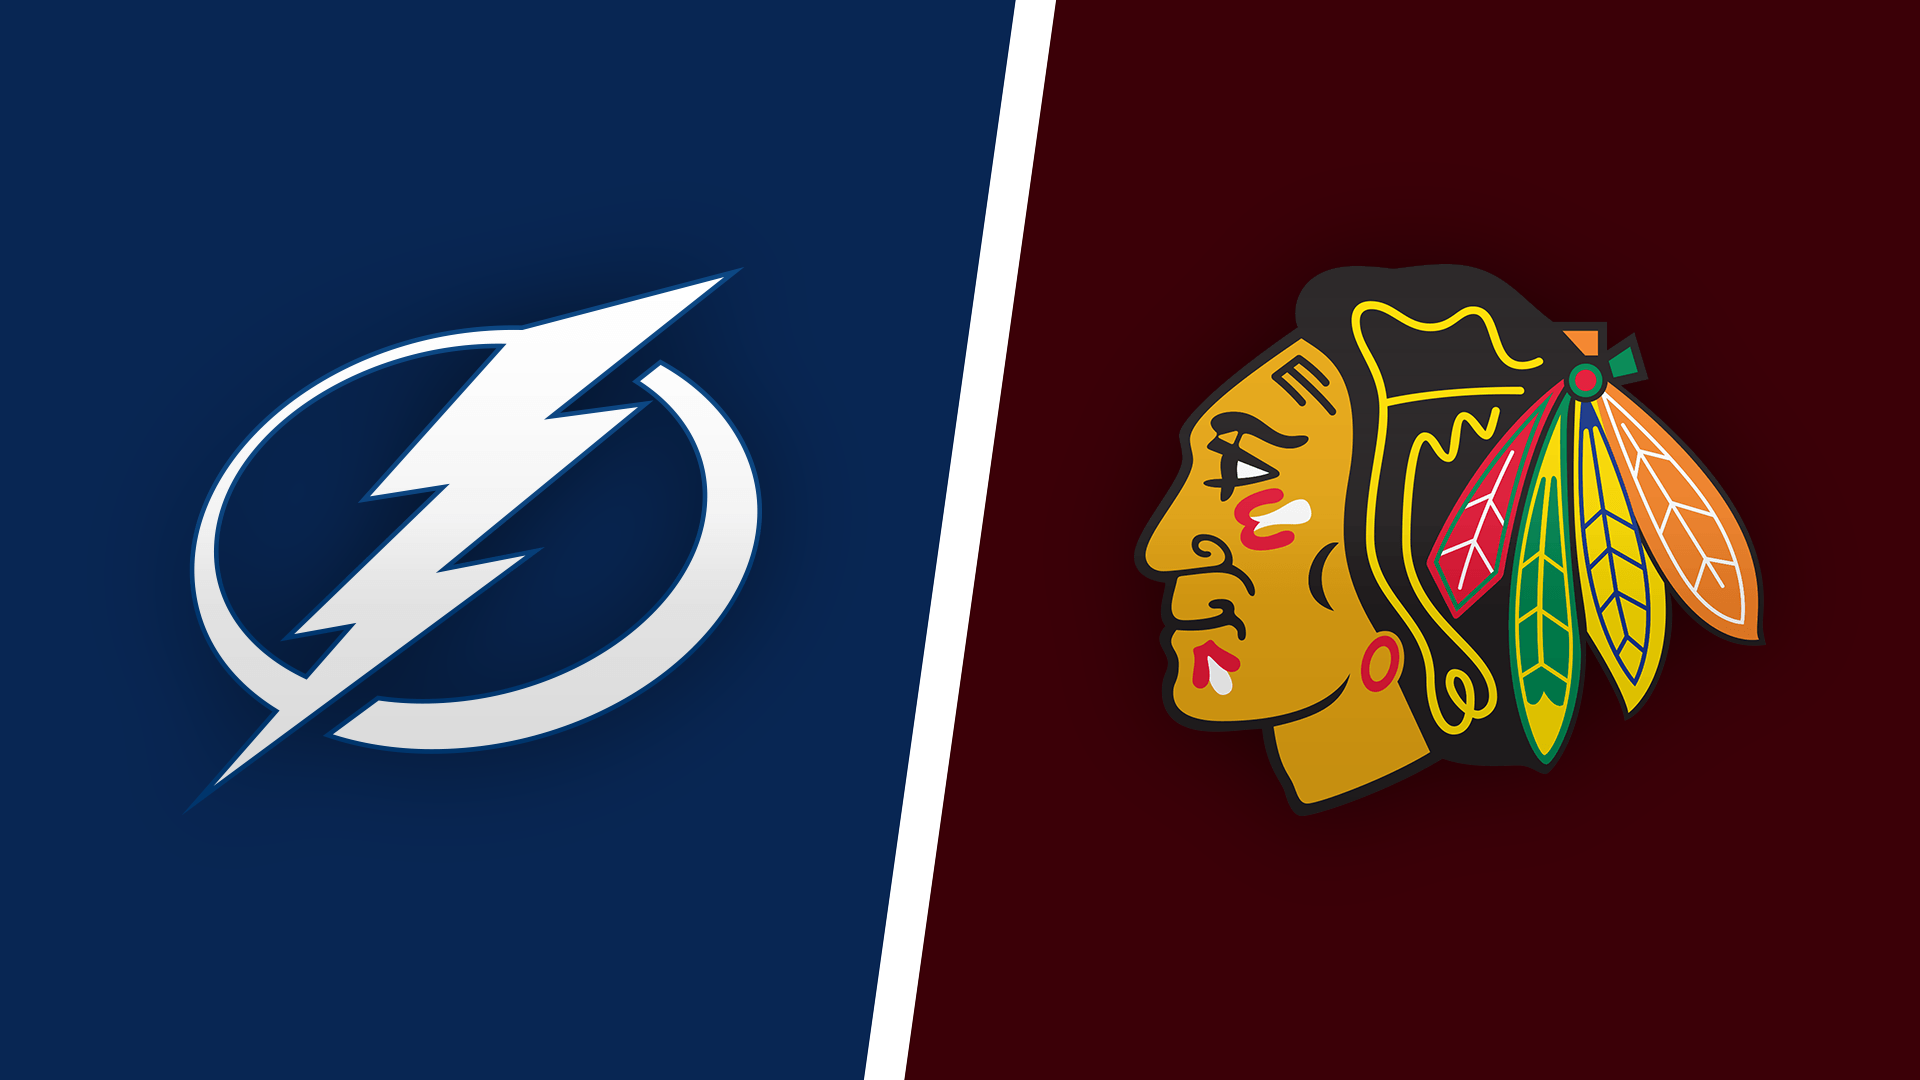 Tampa bay lightning vs chicago blackhawks how to take position cryptocurrency trade